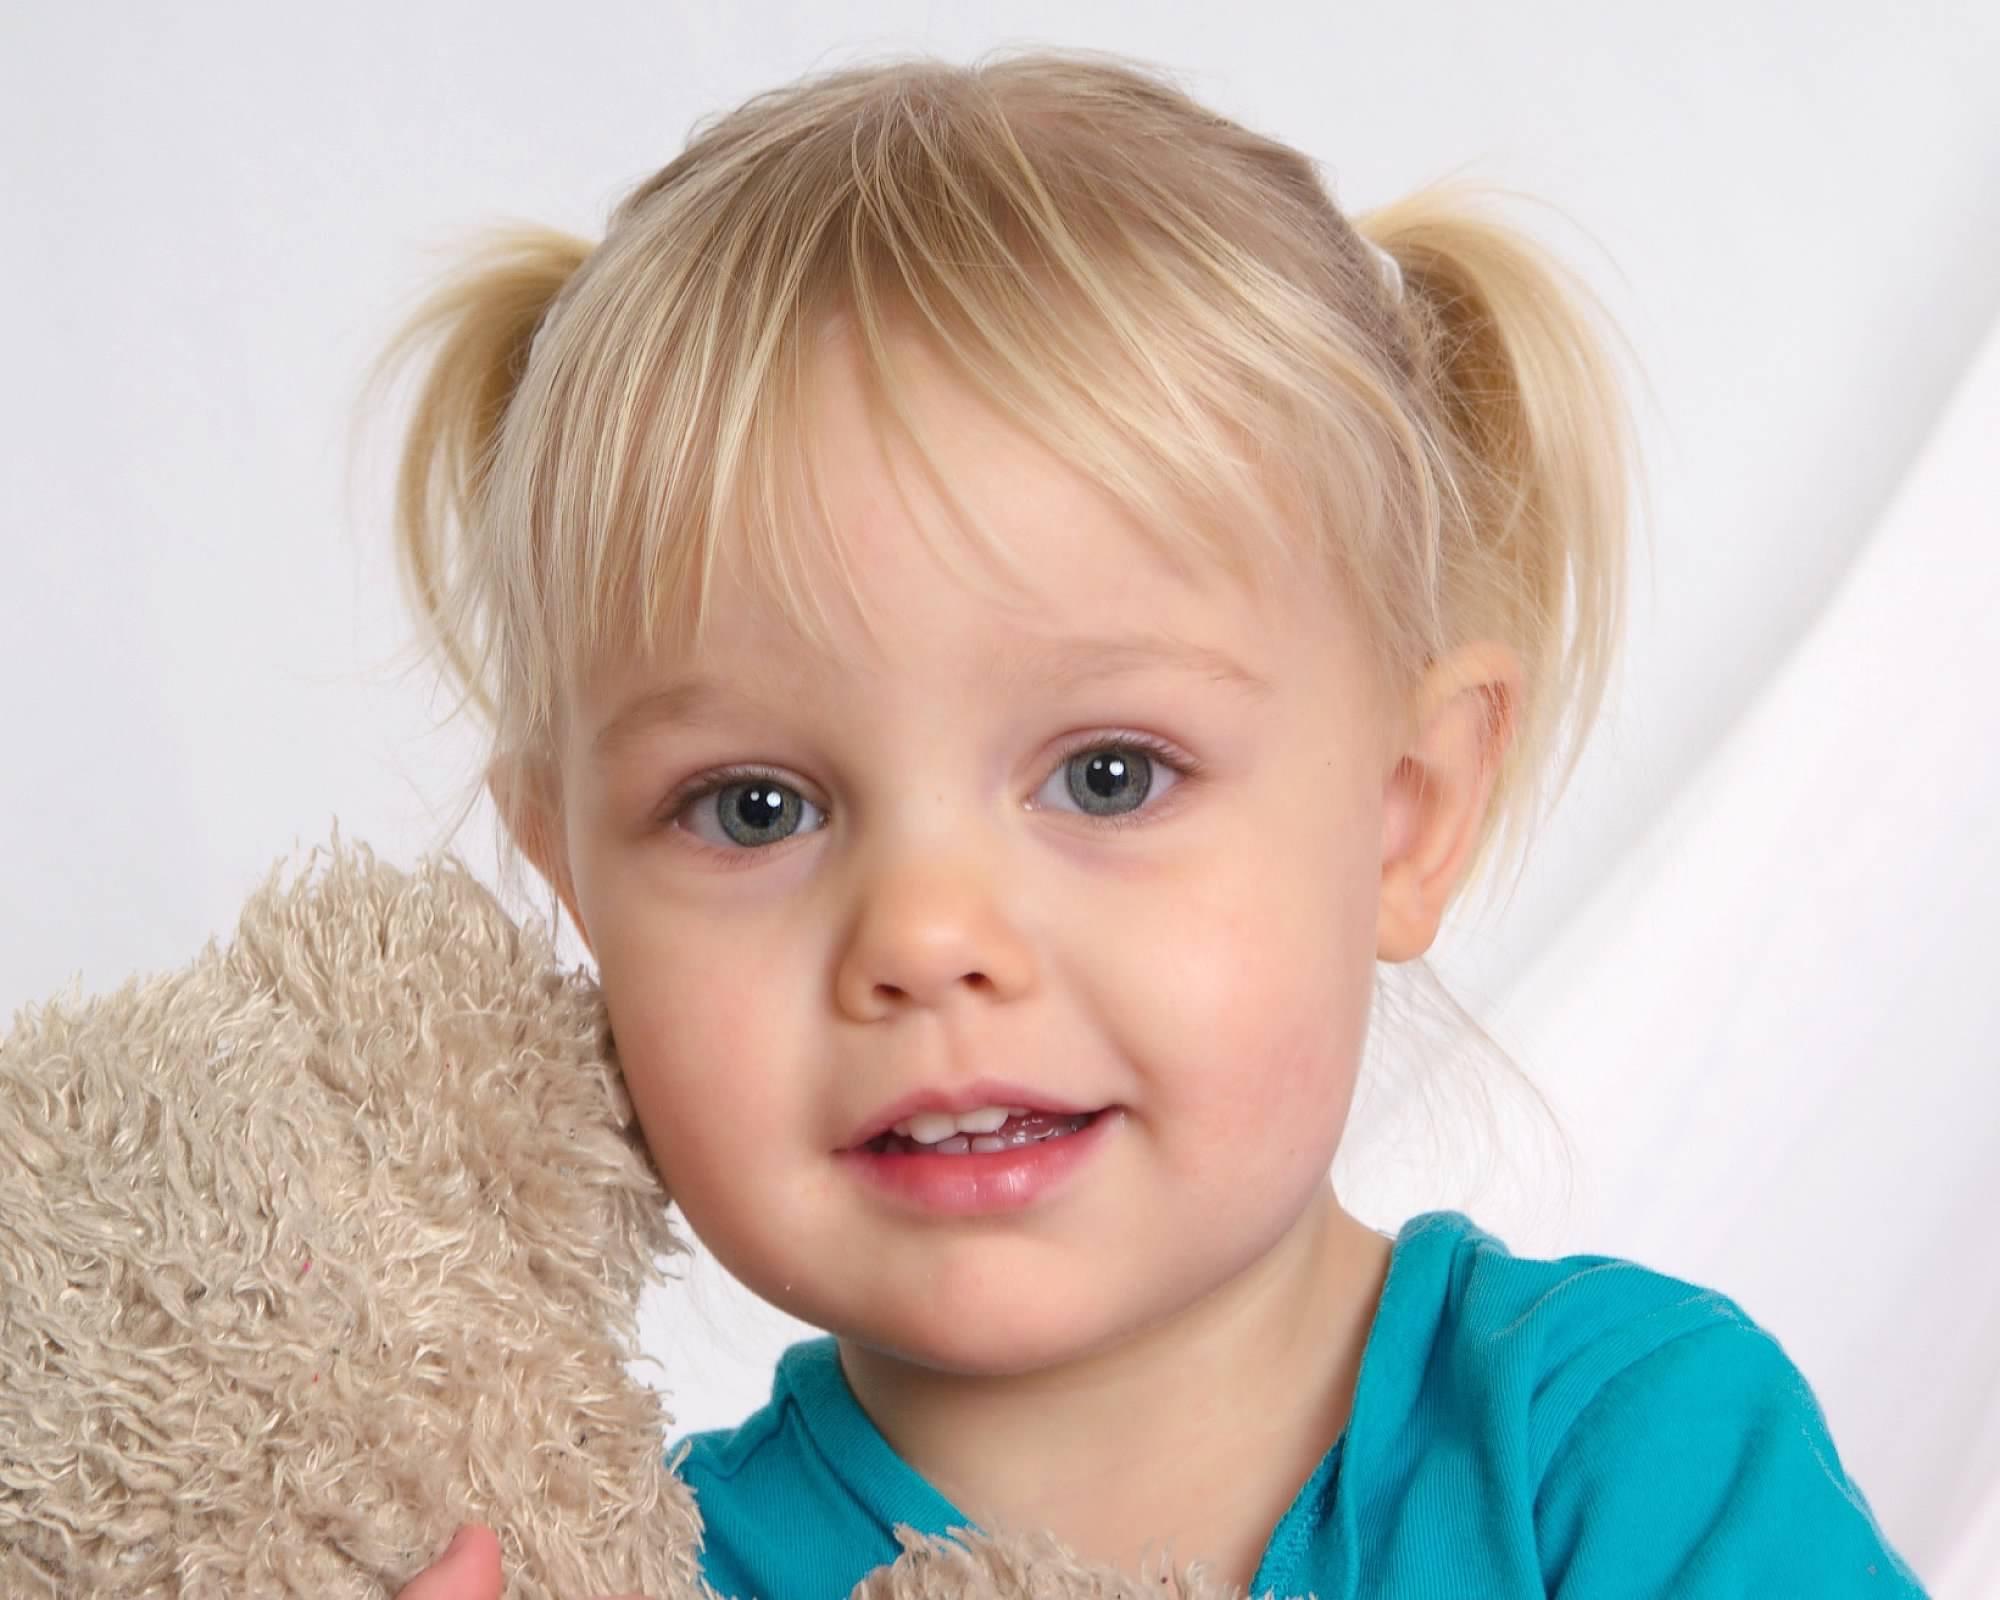 toddler with blonde hair in pigtails holding light brown teddy bear